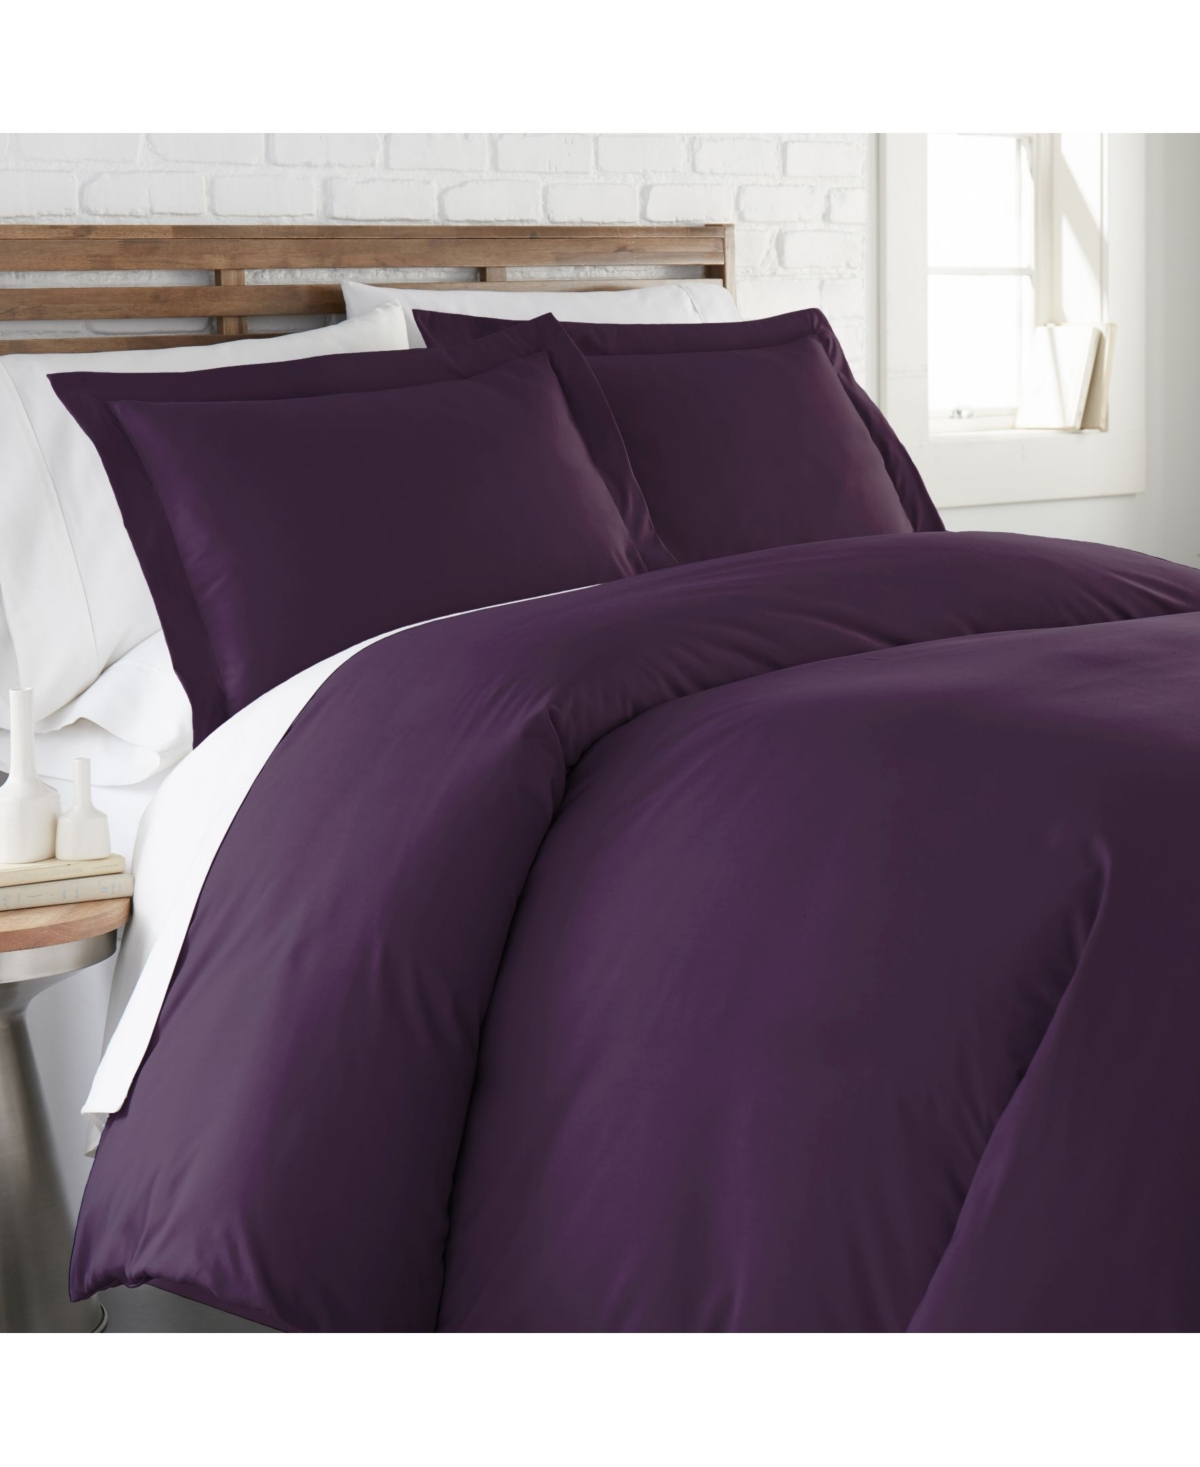 Southshore Fine Linens Ultra-soft Lightweight Embroidered 3-piece Quilt Set, Full/queen In Purple